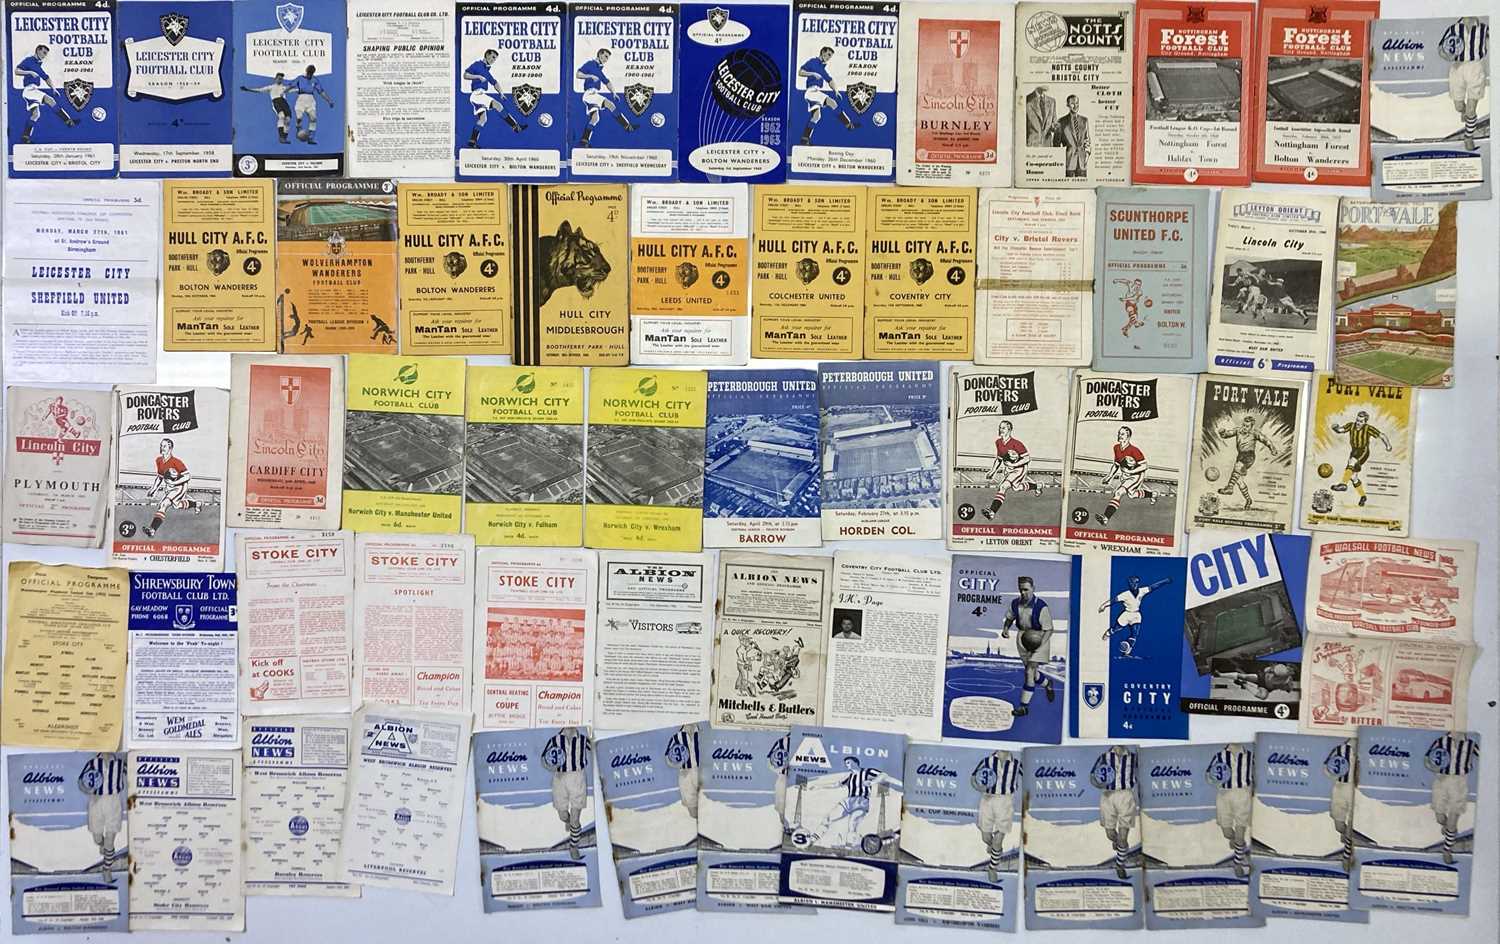 Lot 52 - FOOTBALL PROGRAMMES - MIDLANDS/EASTERN CLUBS 1950S/60S.